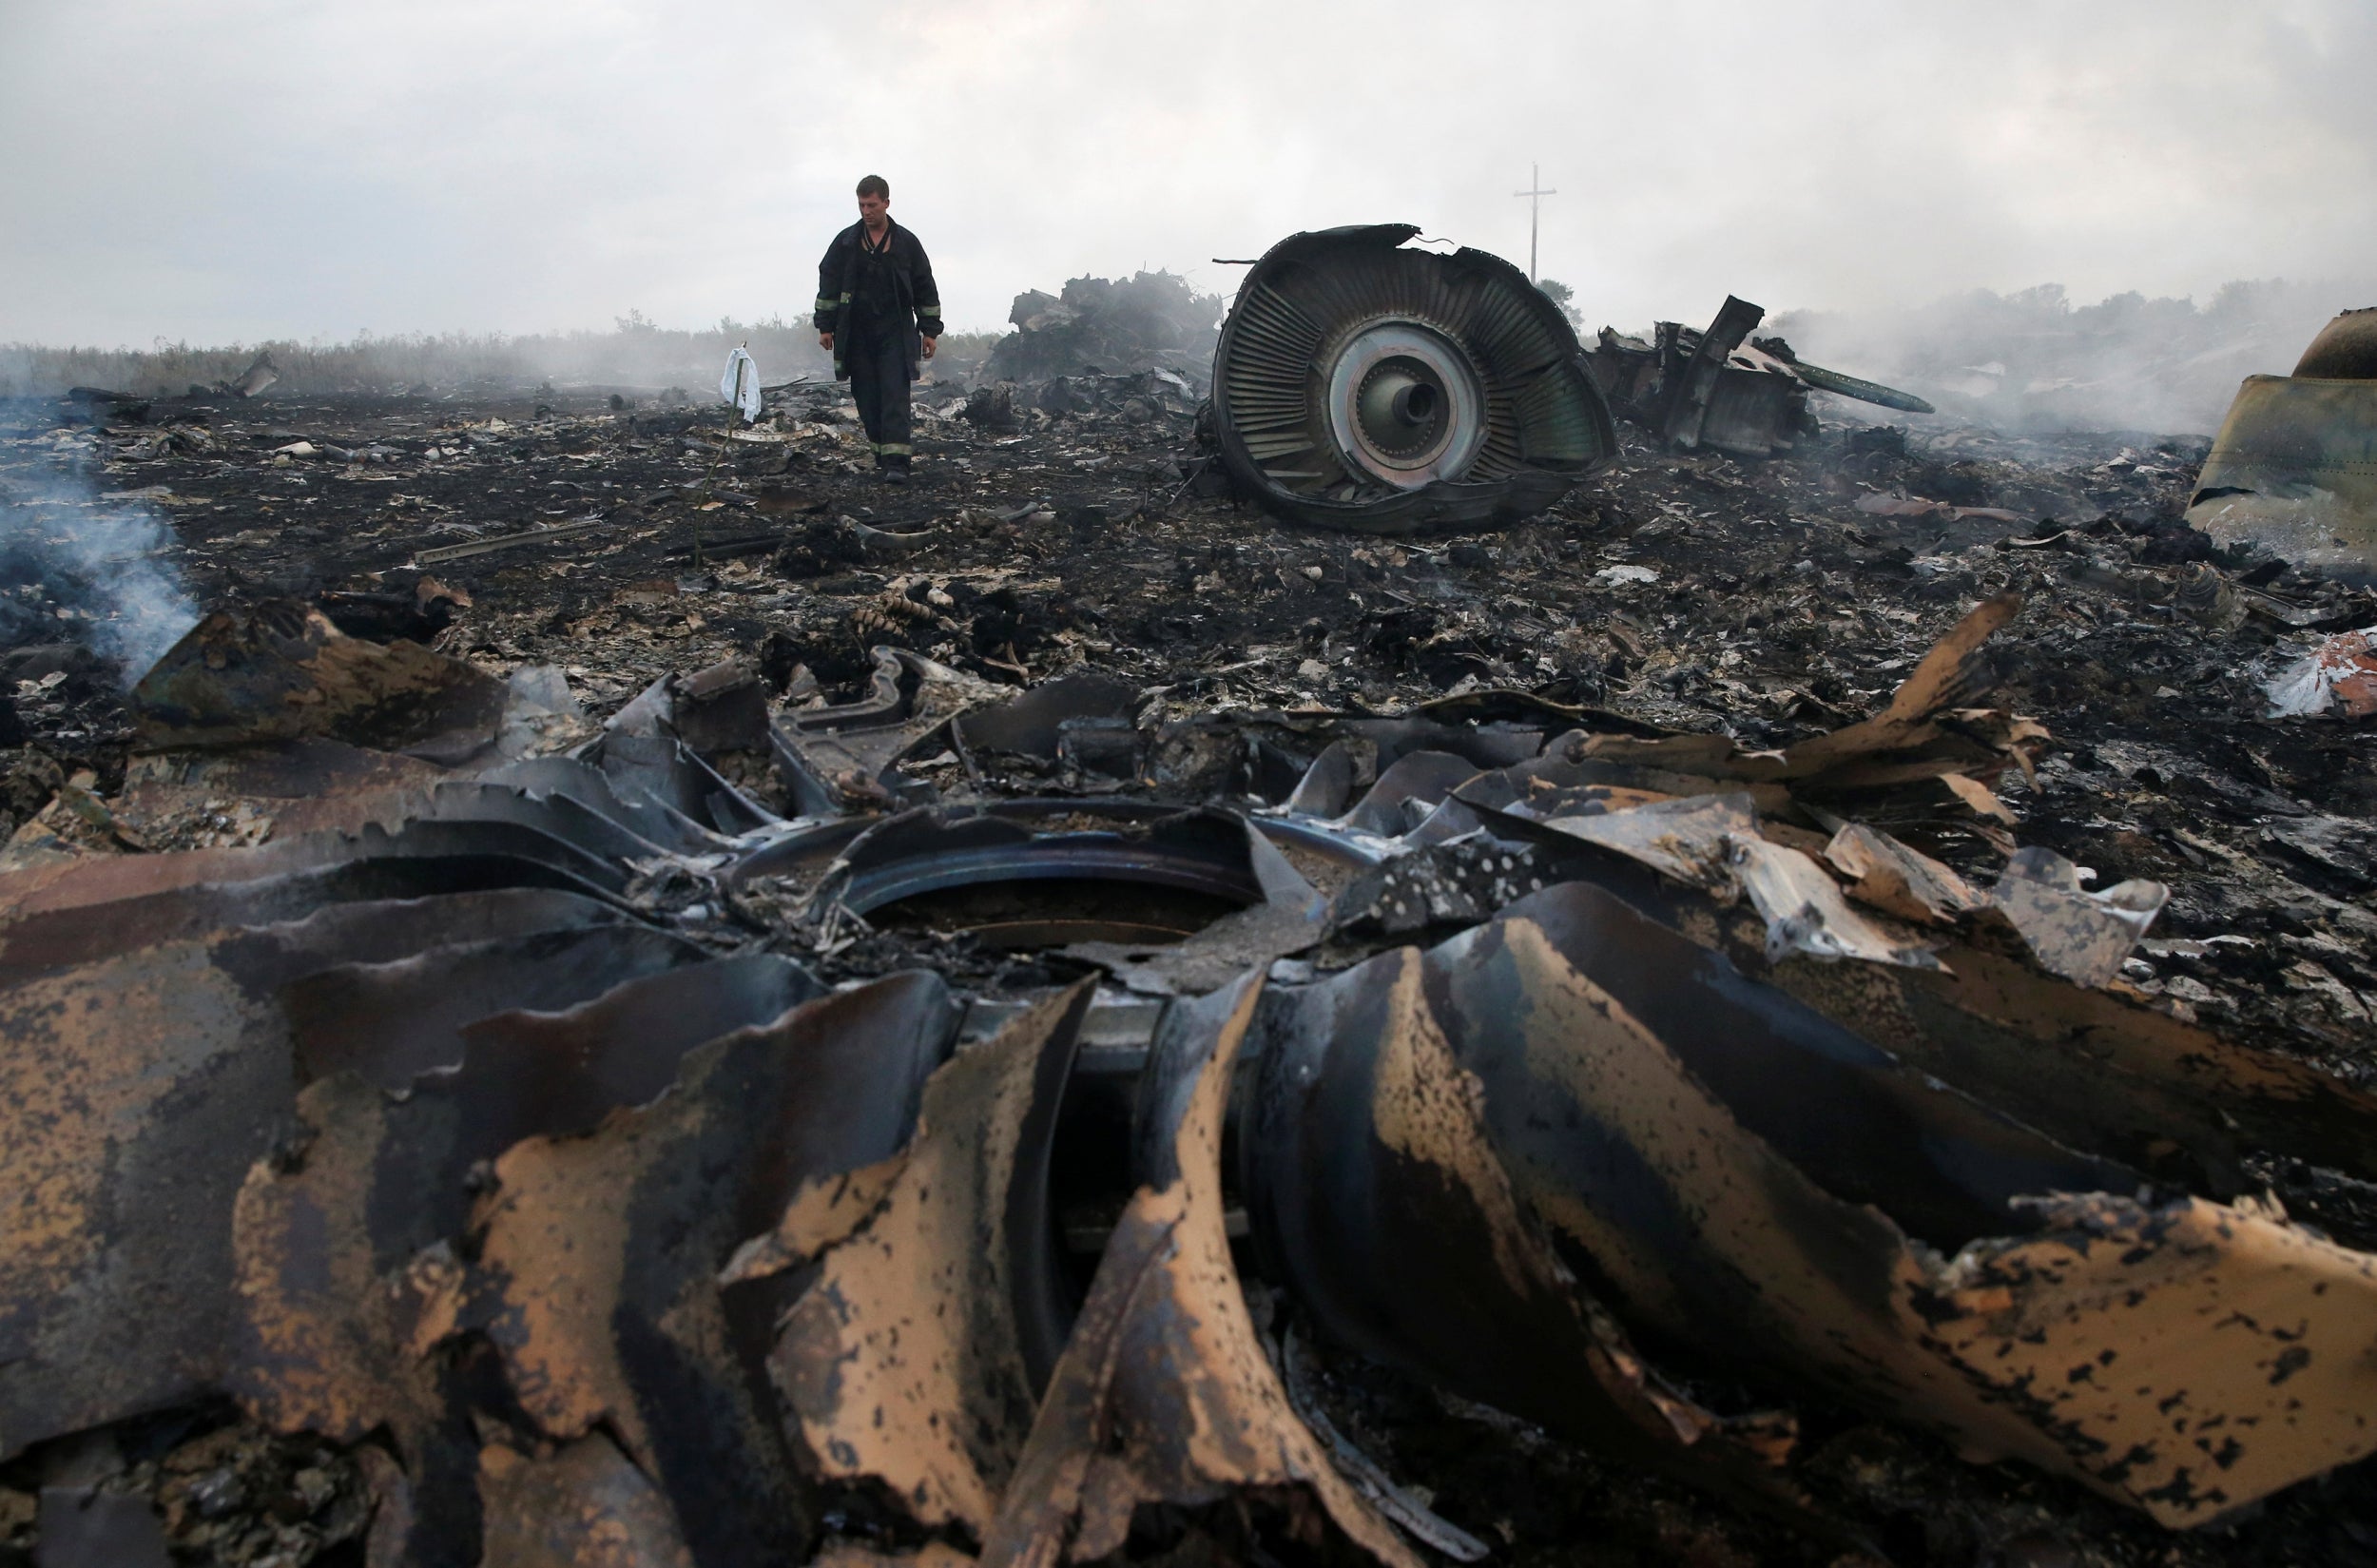 Charred remnants of the Malaysia Airlines plane downed in the Donetsk region